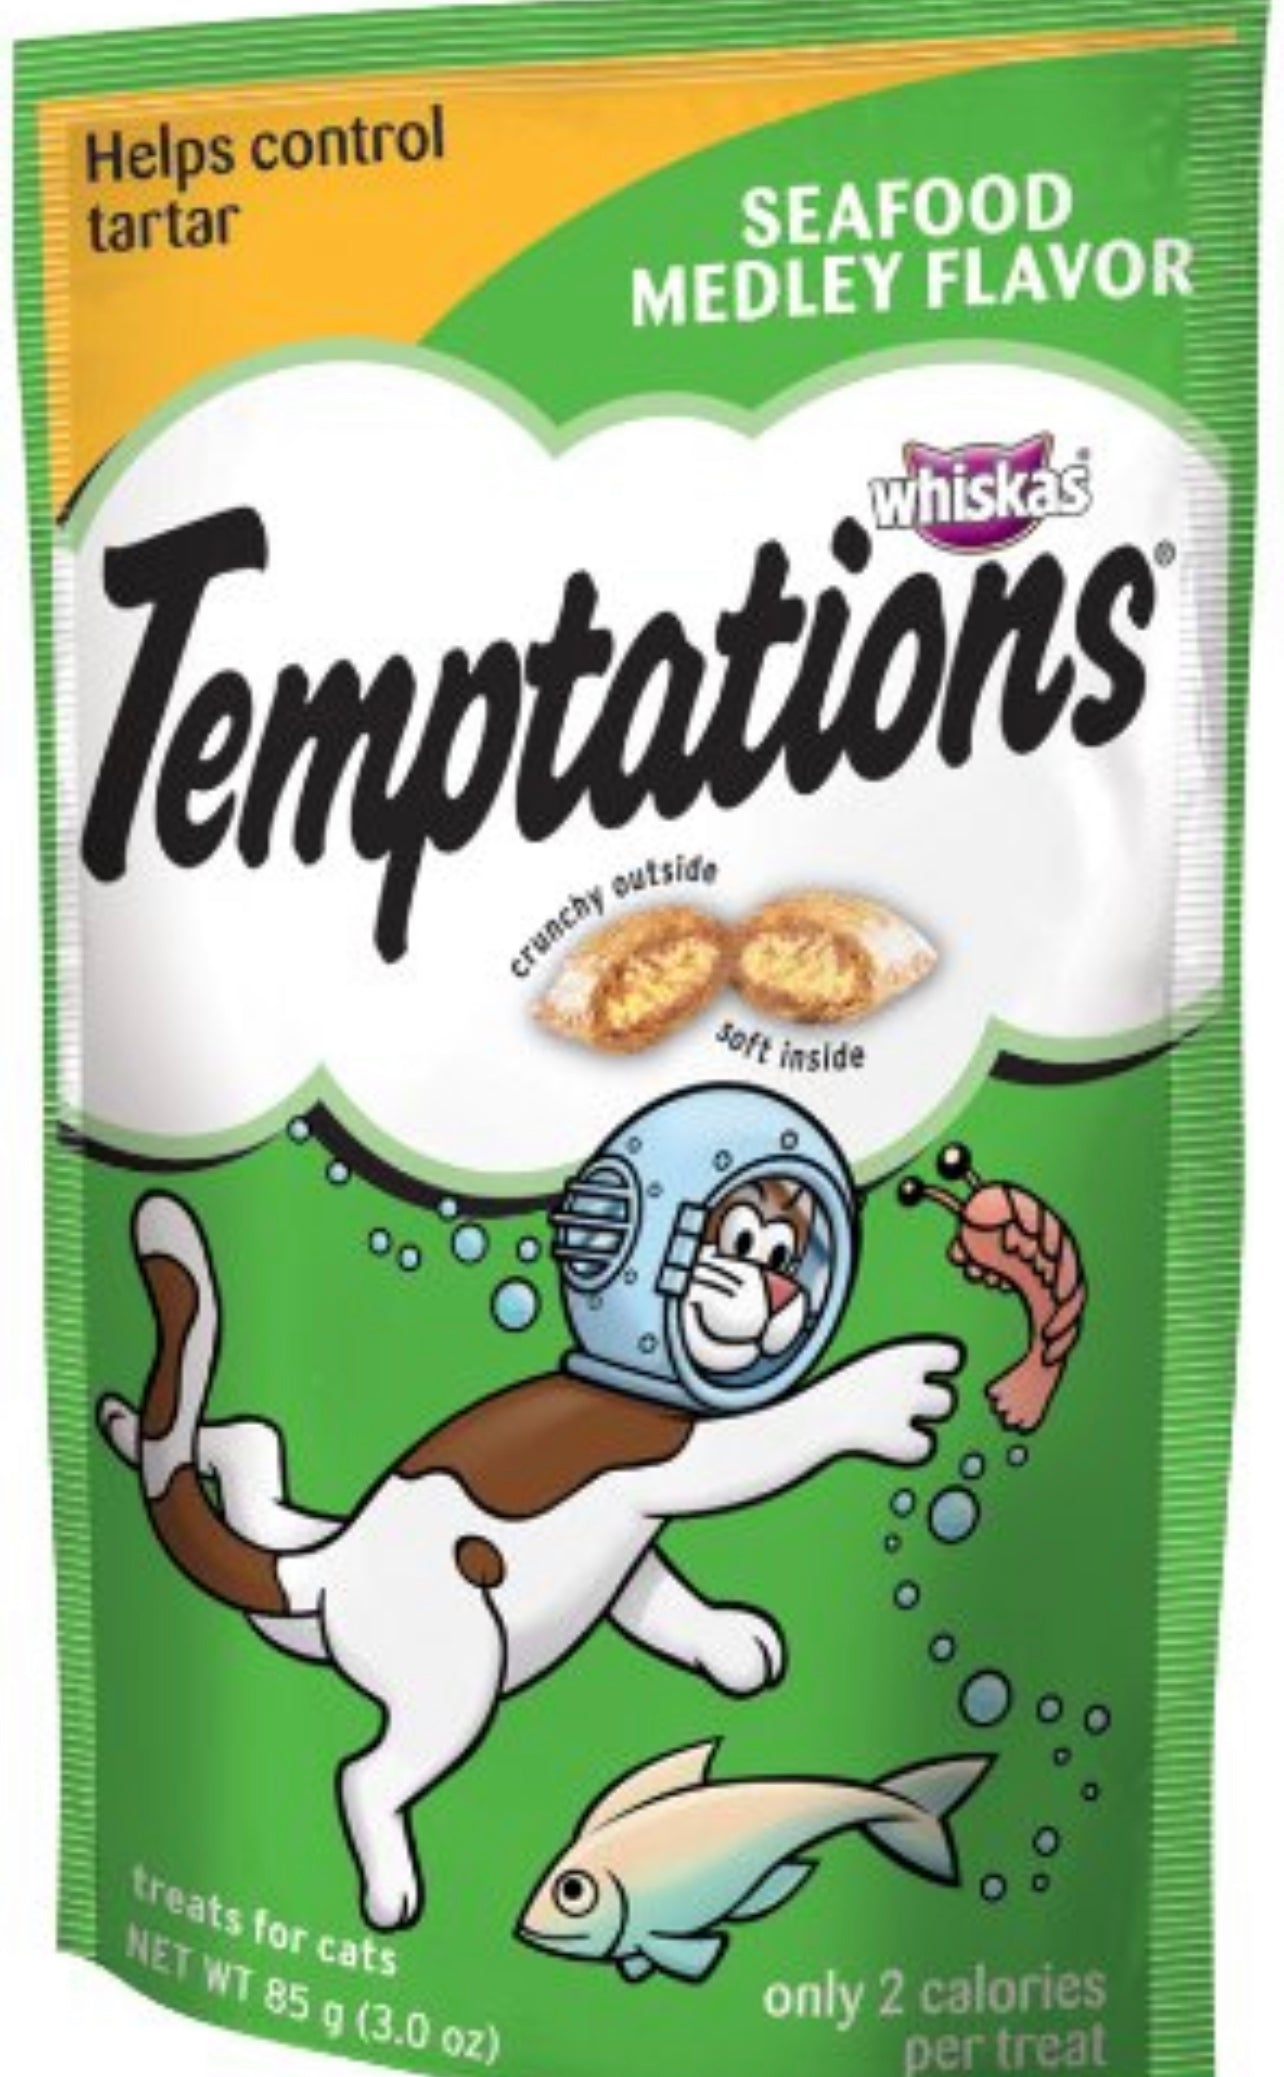 Fun Treats! For all Pets!